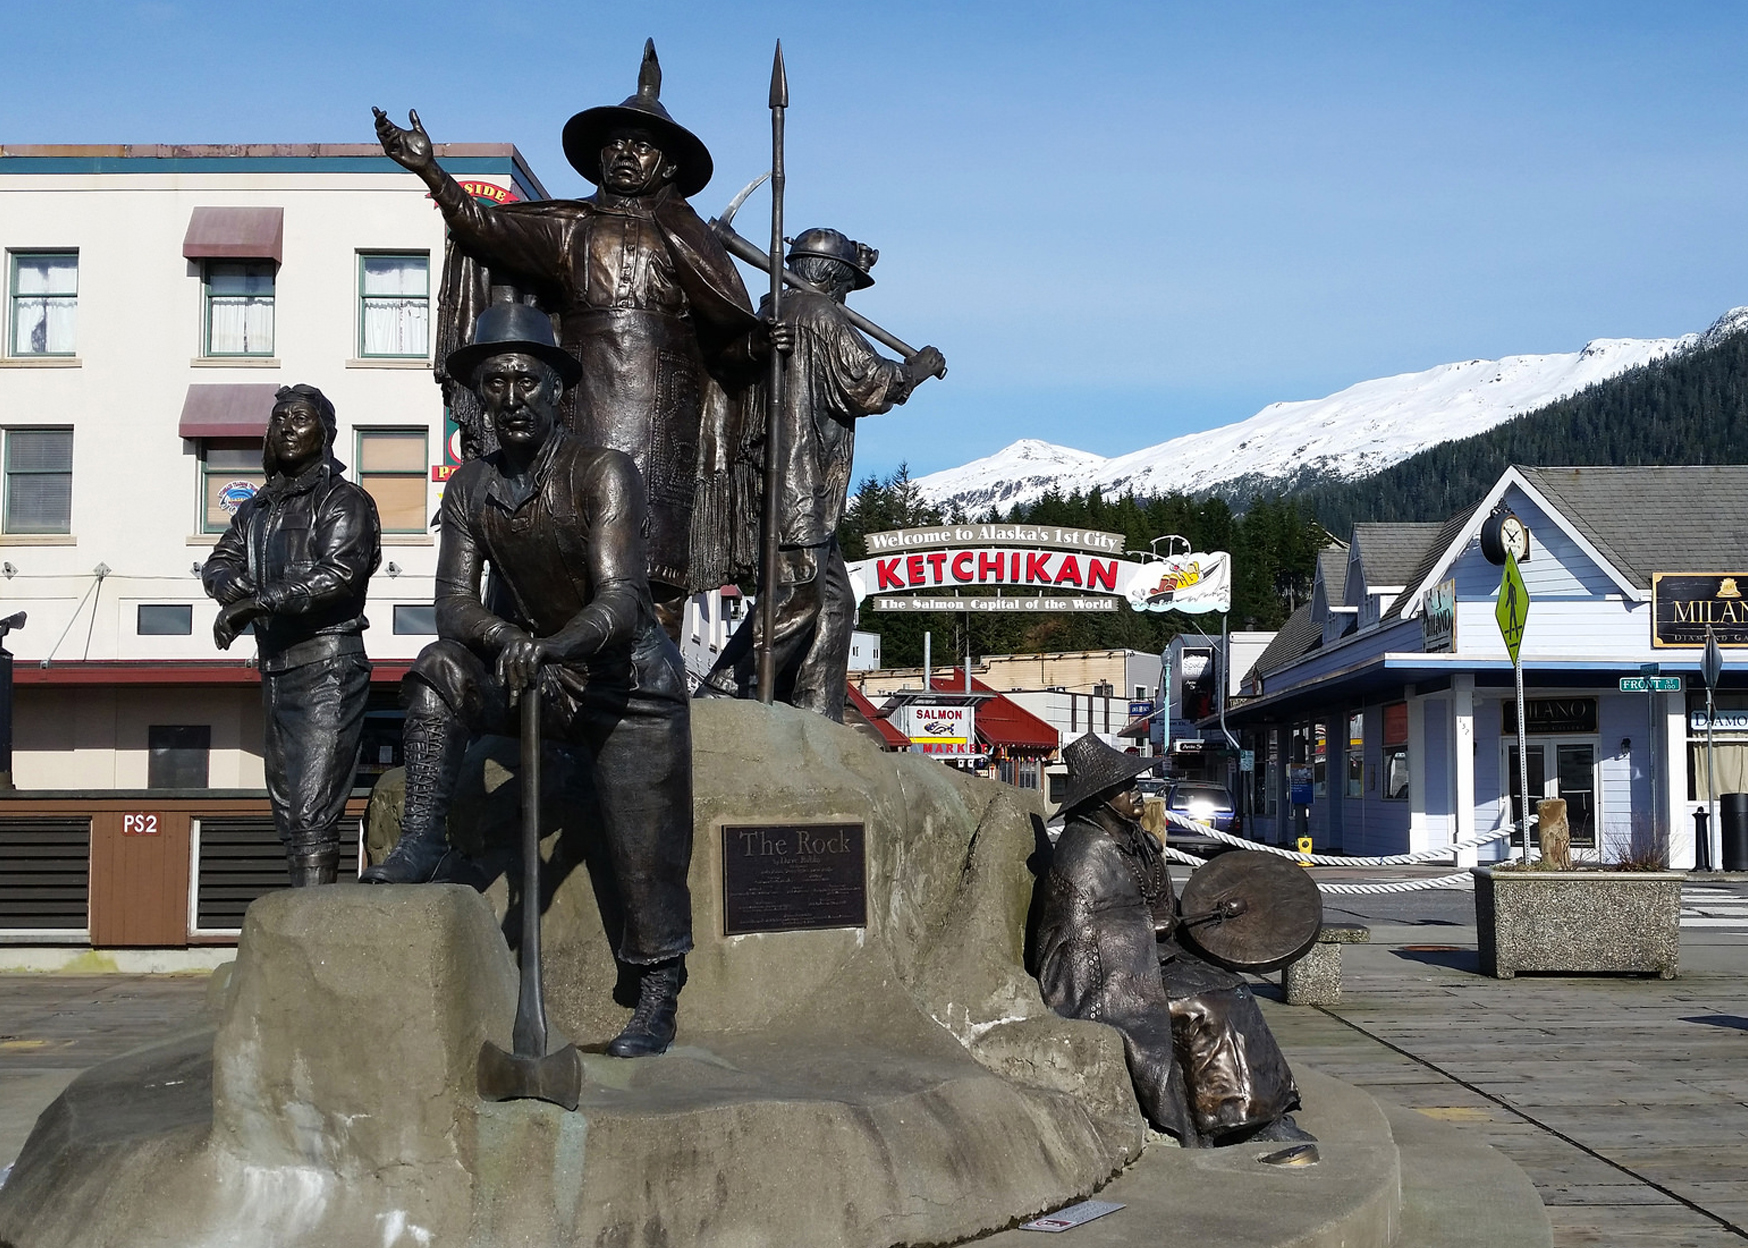  Dave Rubin's The Rock , right next to the Ketchikan Visitors Bureau. 